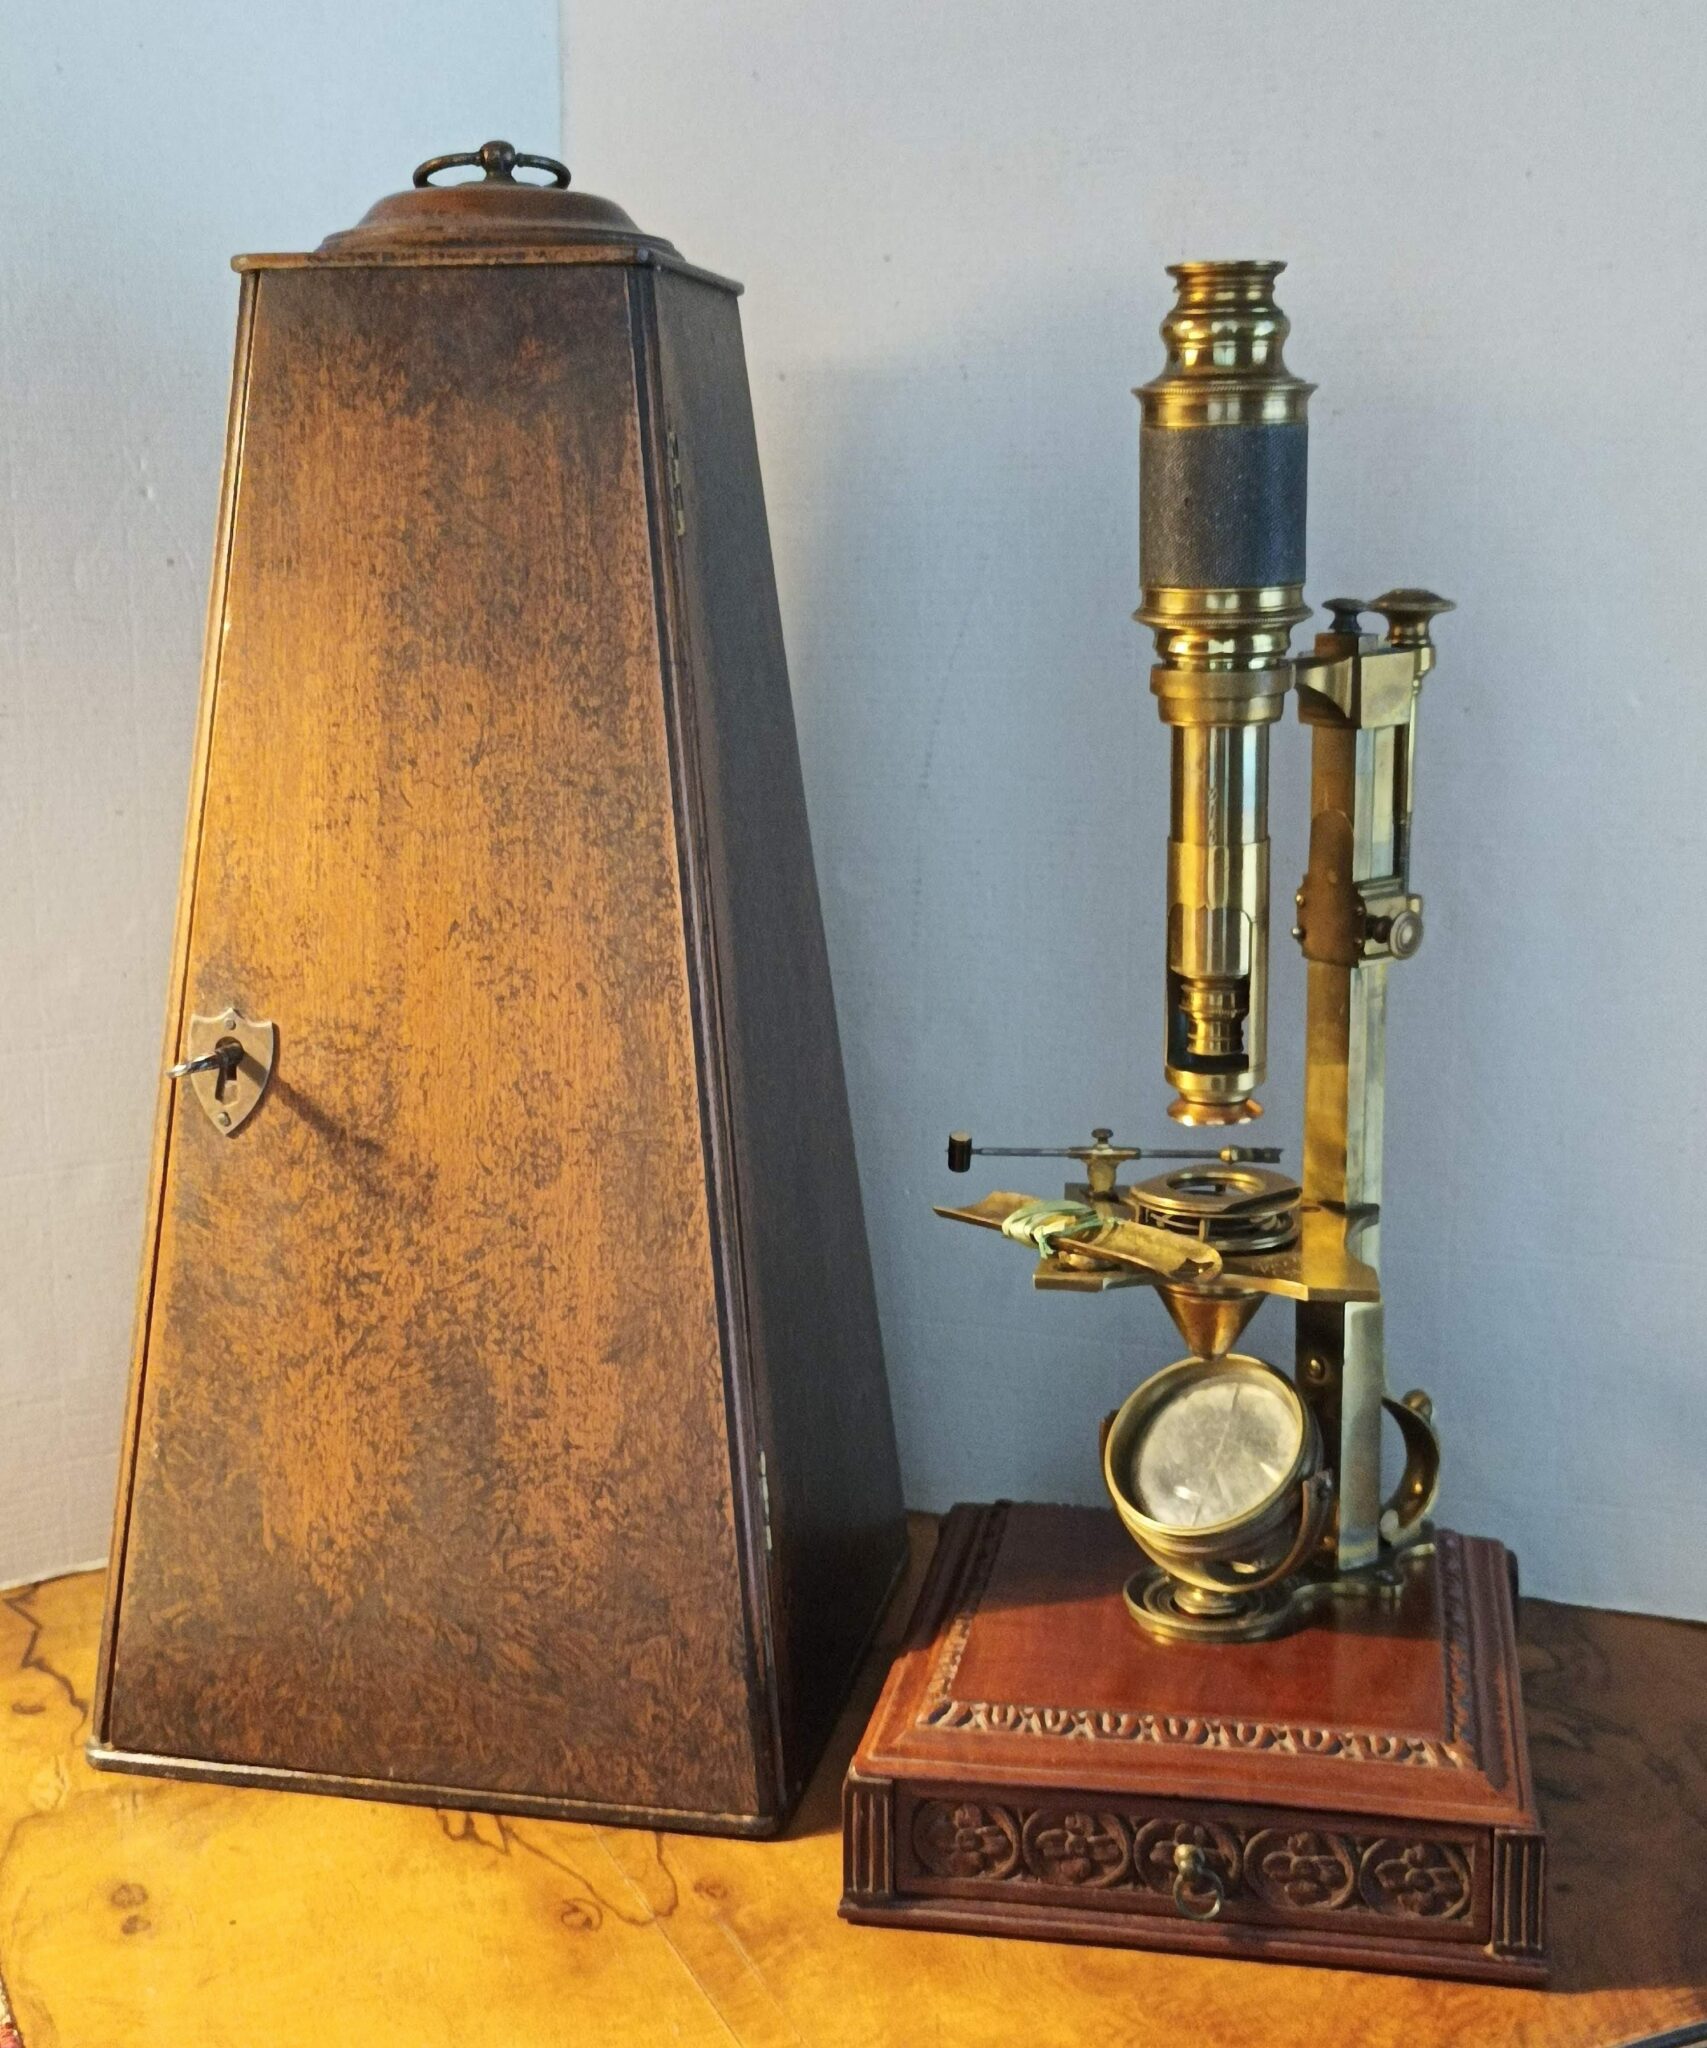 An exquisite Cuff-type microscope by Sterrop, 1747-1756 + case